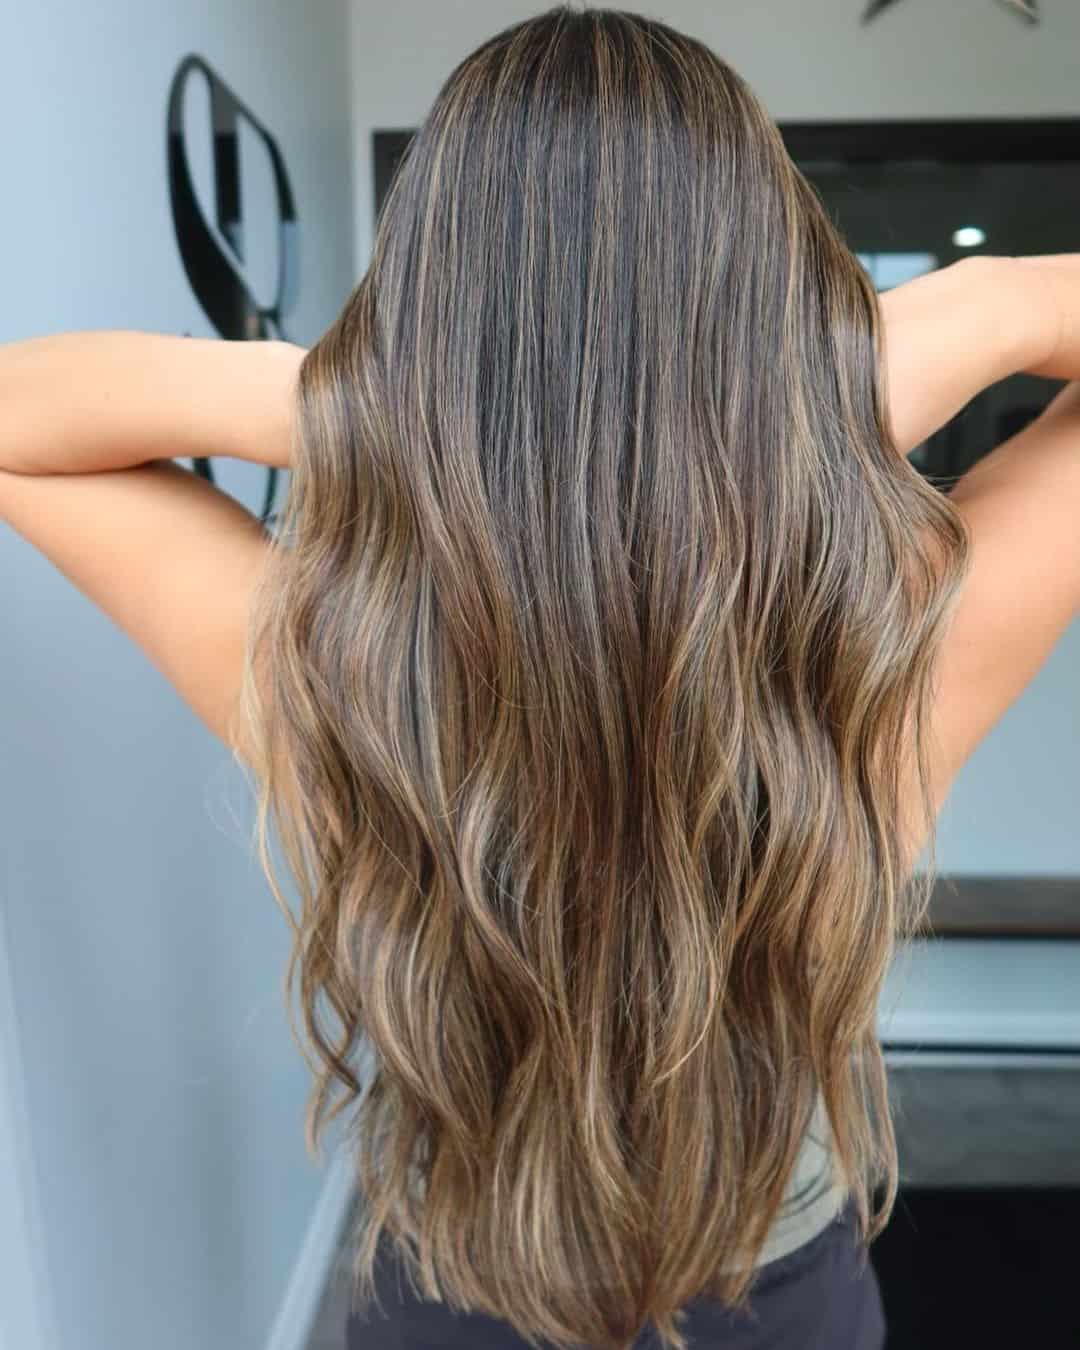 Long, Silky & Smooth Colored Hairstyle 